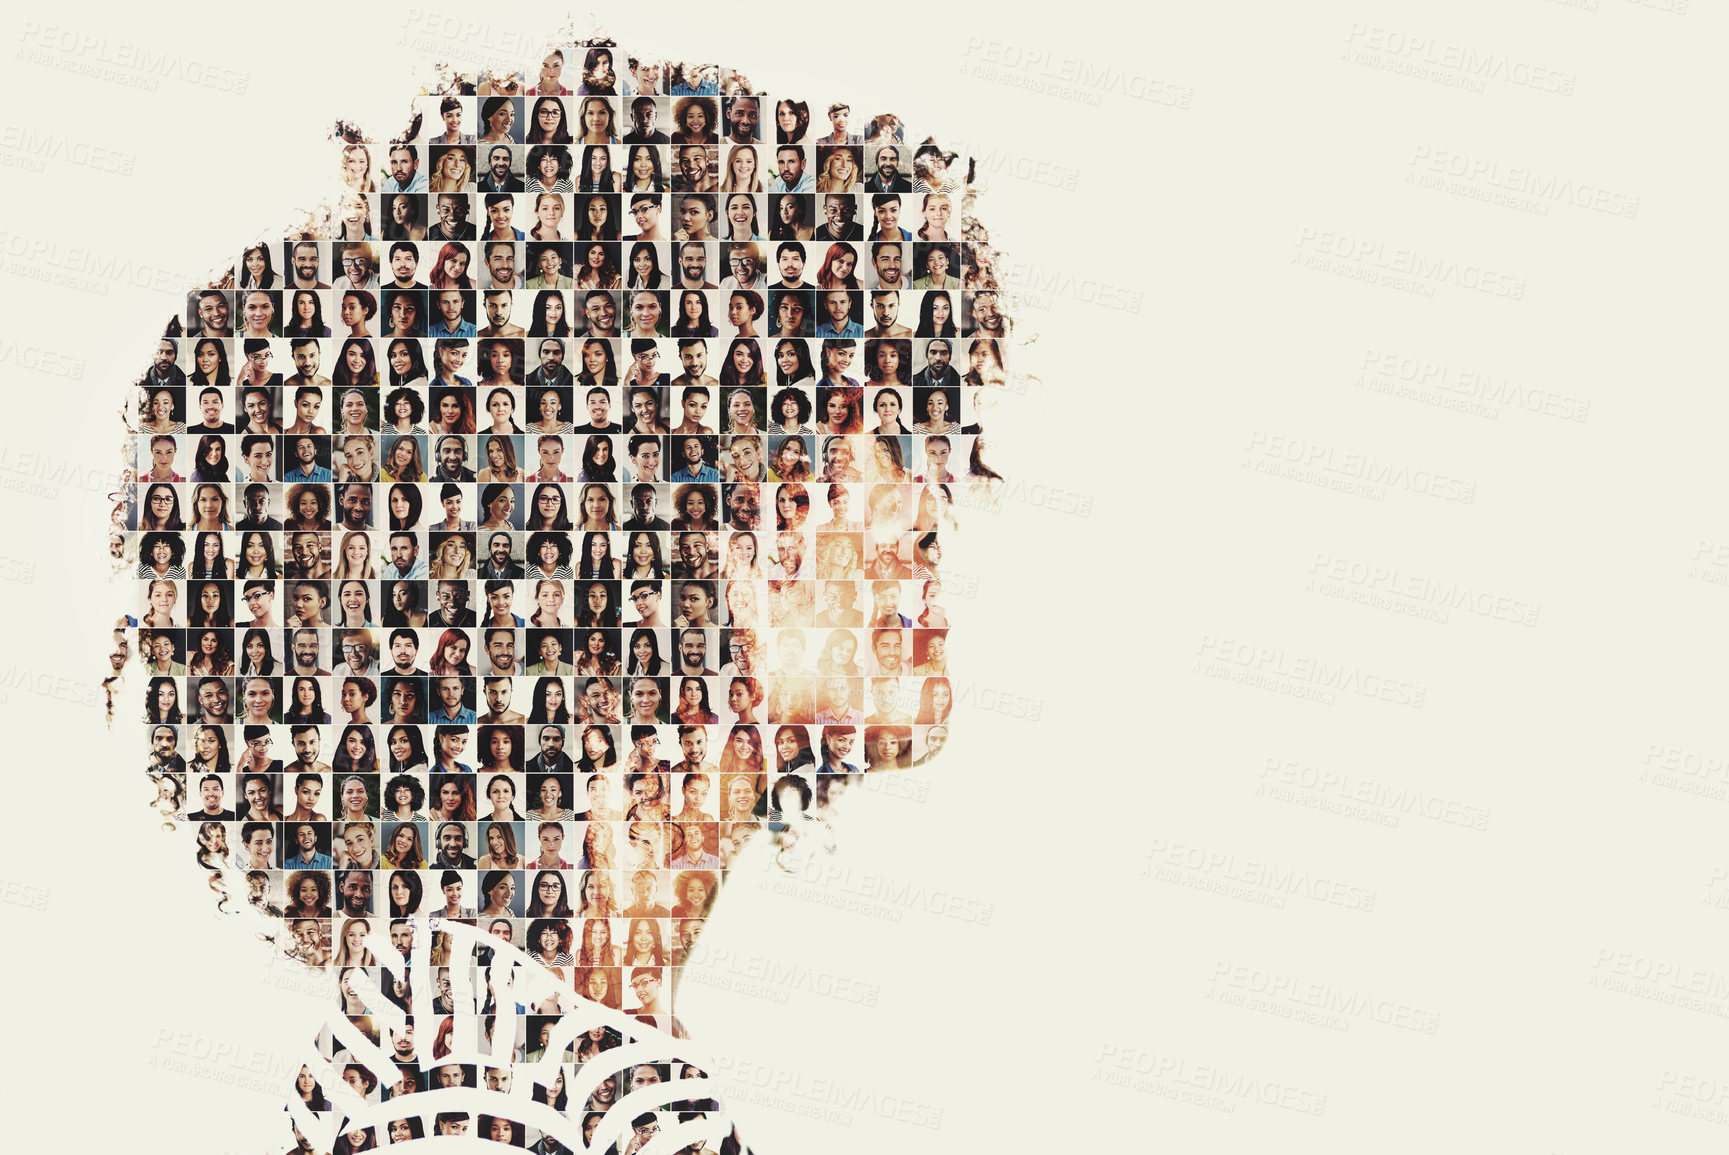 Buy stock photo Composite image of a diverse group of people superimposed on a woman's profile